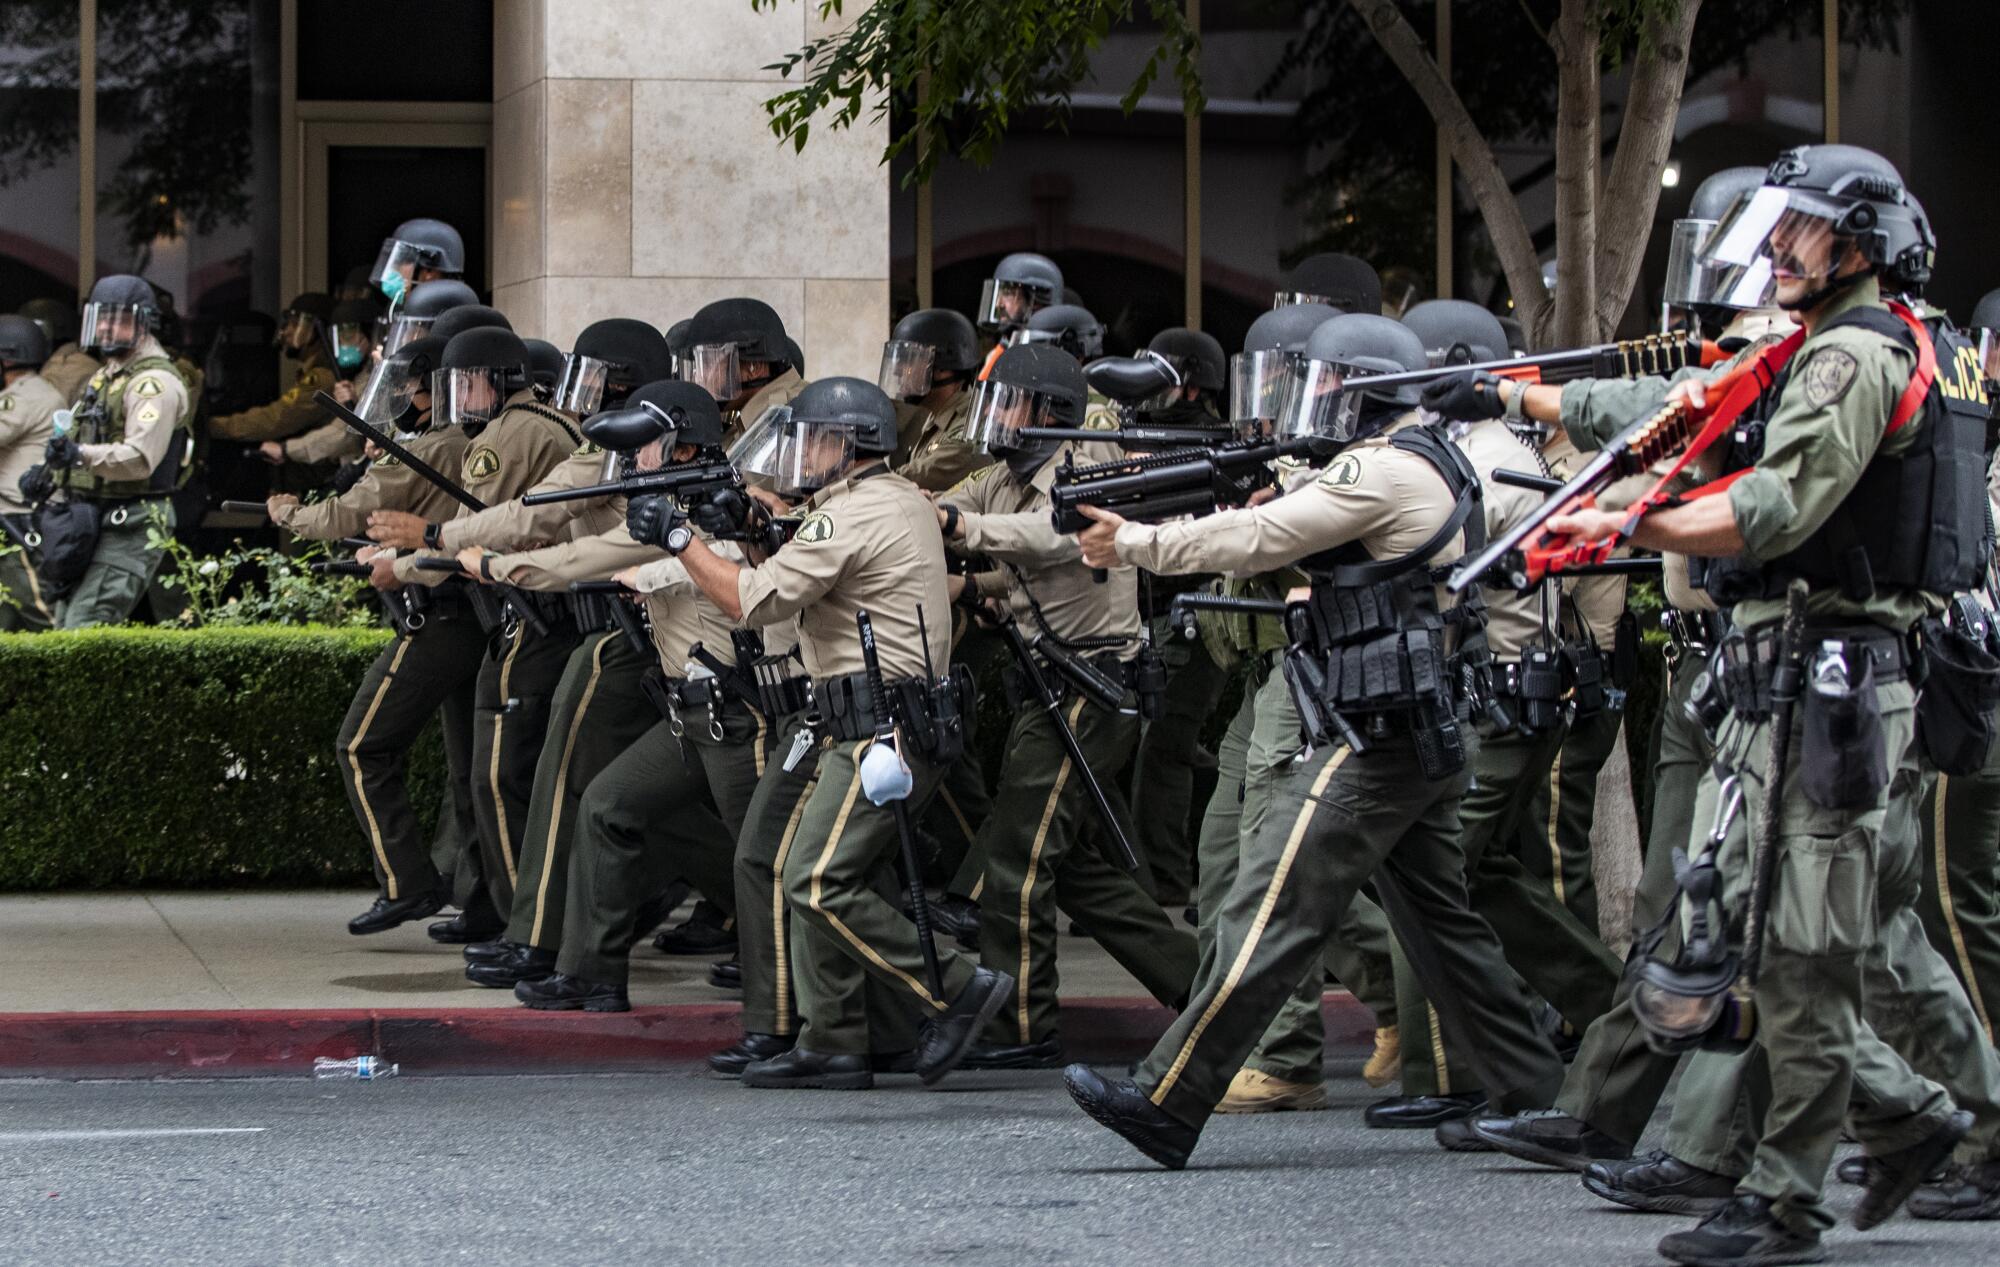 Riverside County sheriffs advance on demonstrators who refused to disperse after the 6 p.m. curfew.